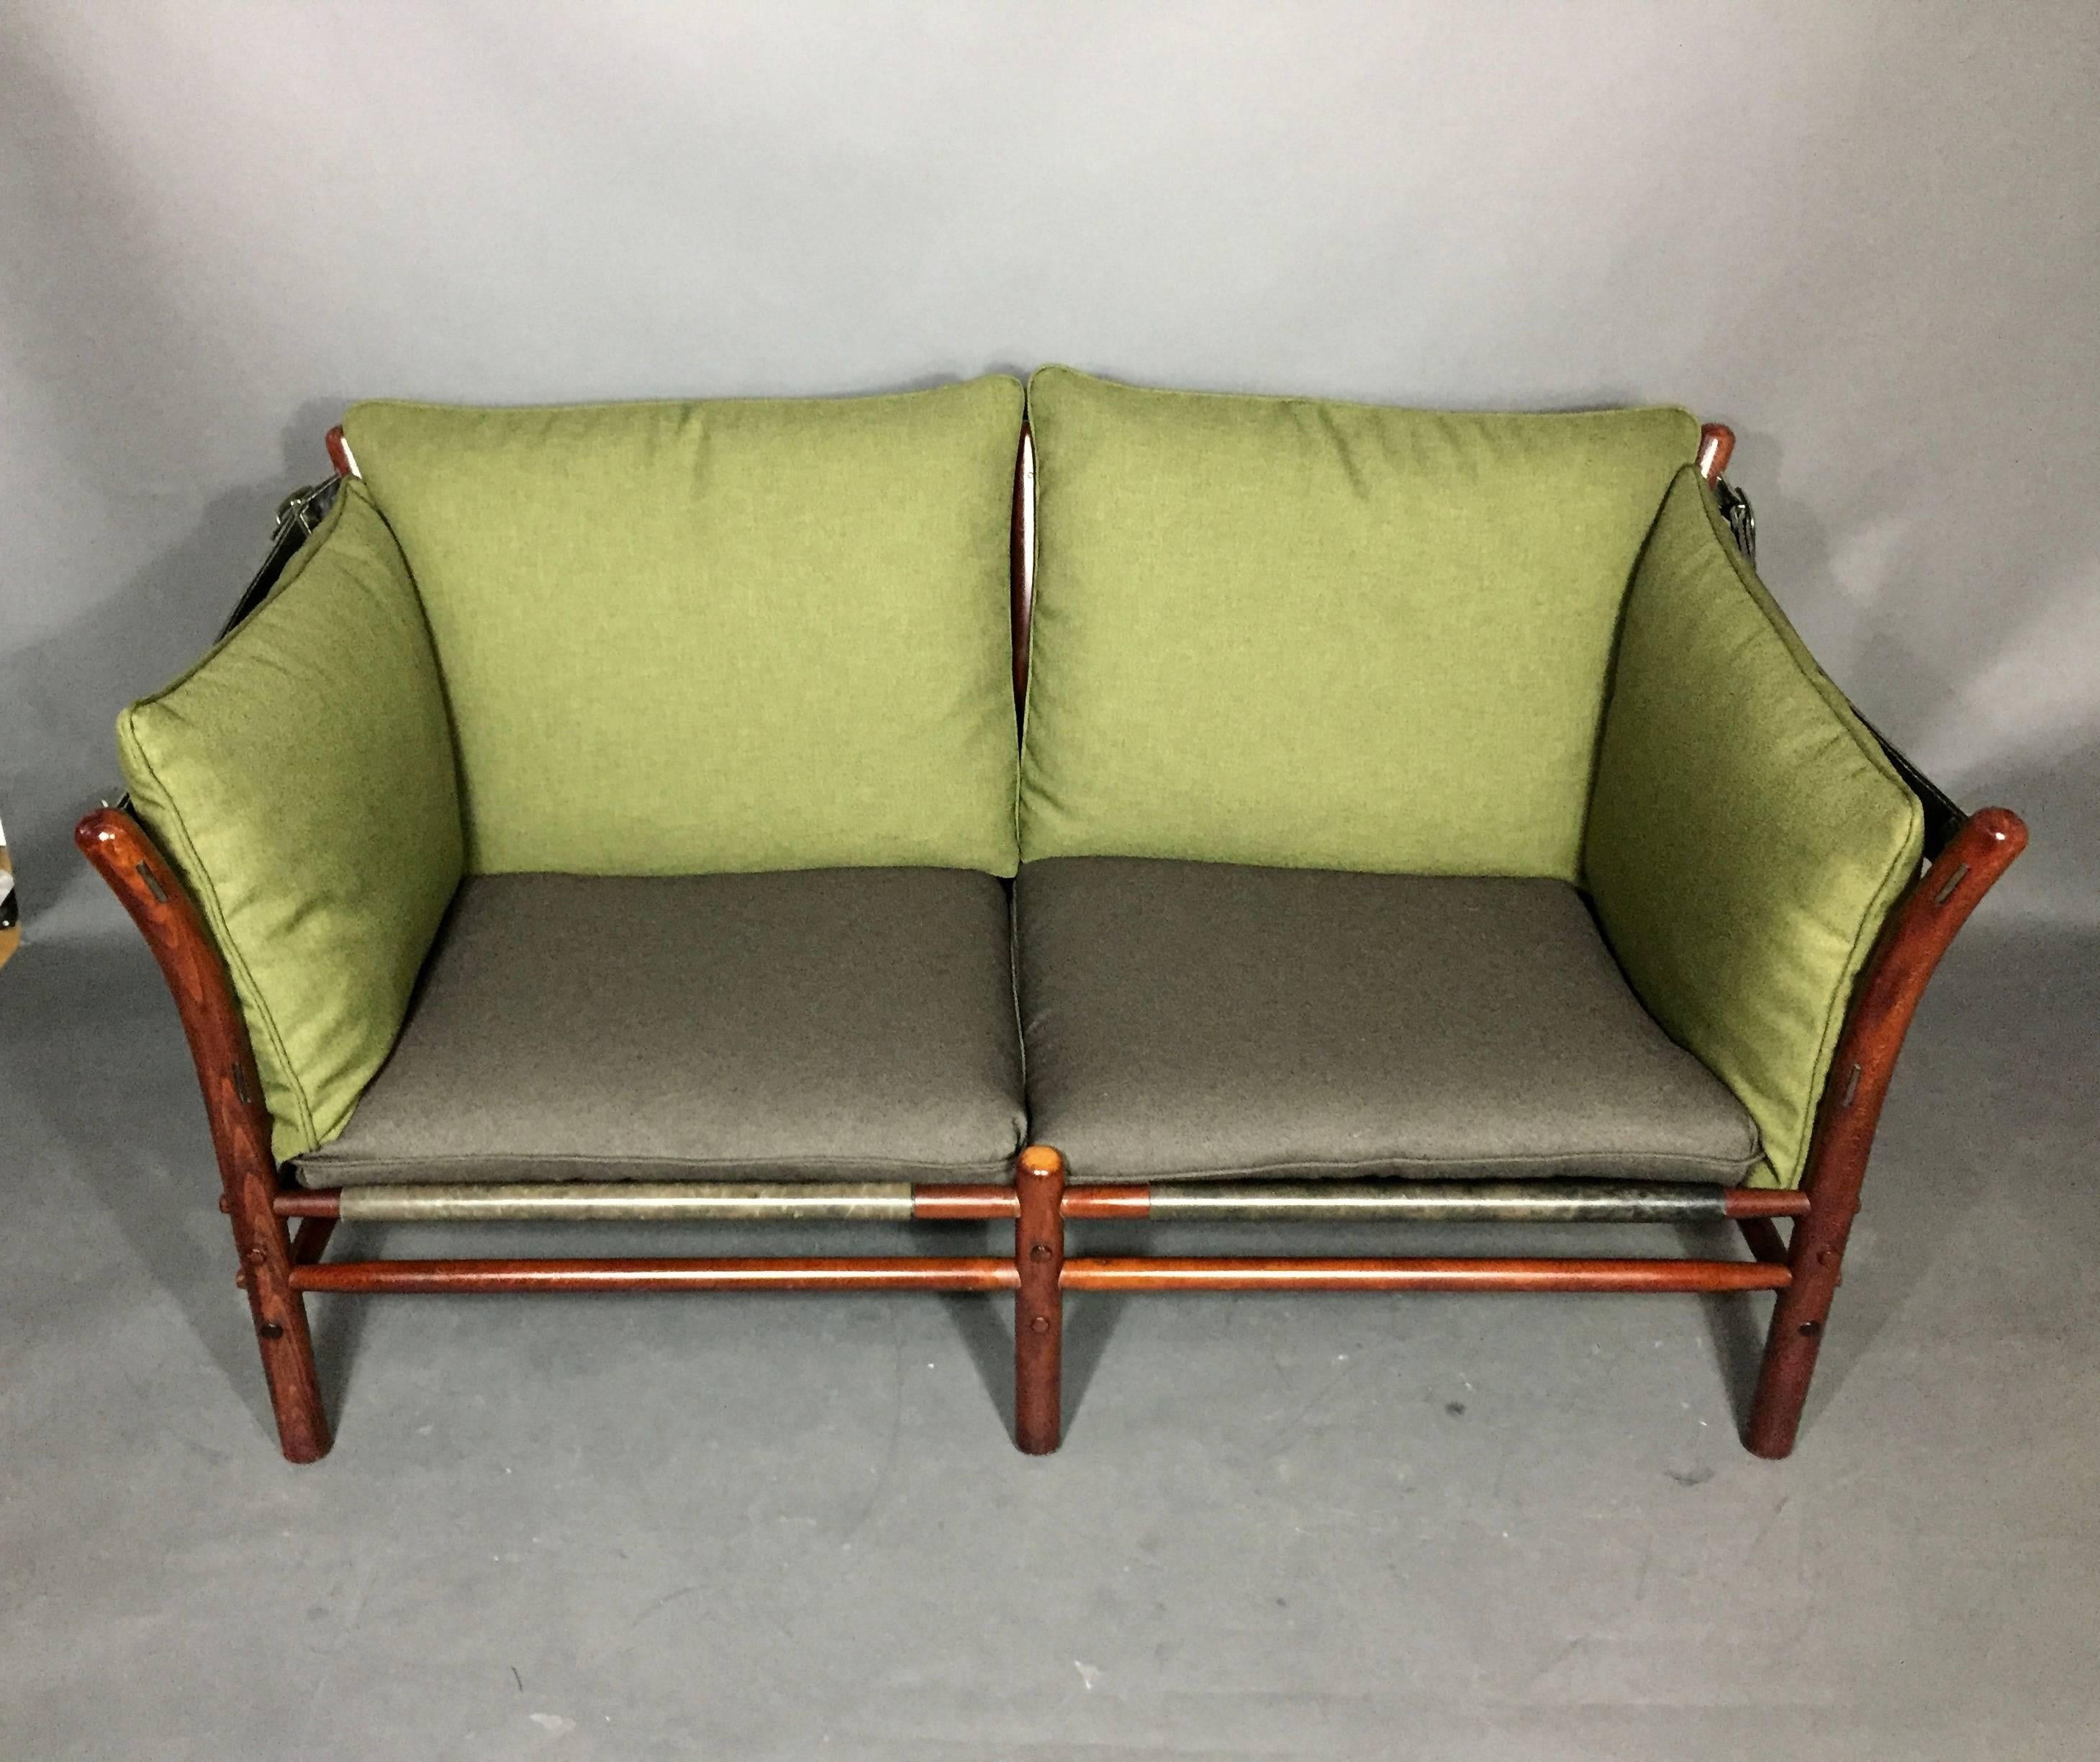 The safari sofa with black saddle leather strapped overall is one of Arne Norell's most admired and SEXY designs. This one has cushions recently updated with Maharam fabric in green/brown. Marked with label - Möbel AB Arne Norell Anby, Sweden.